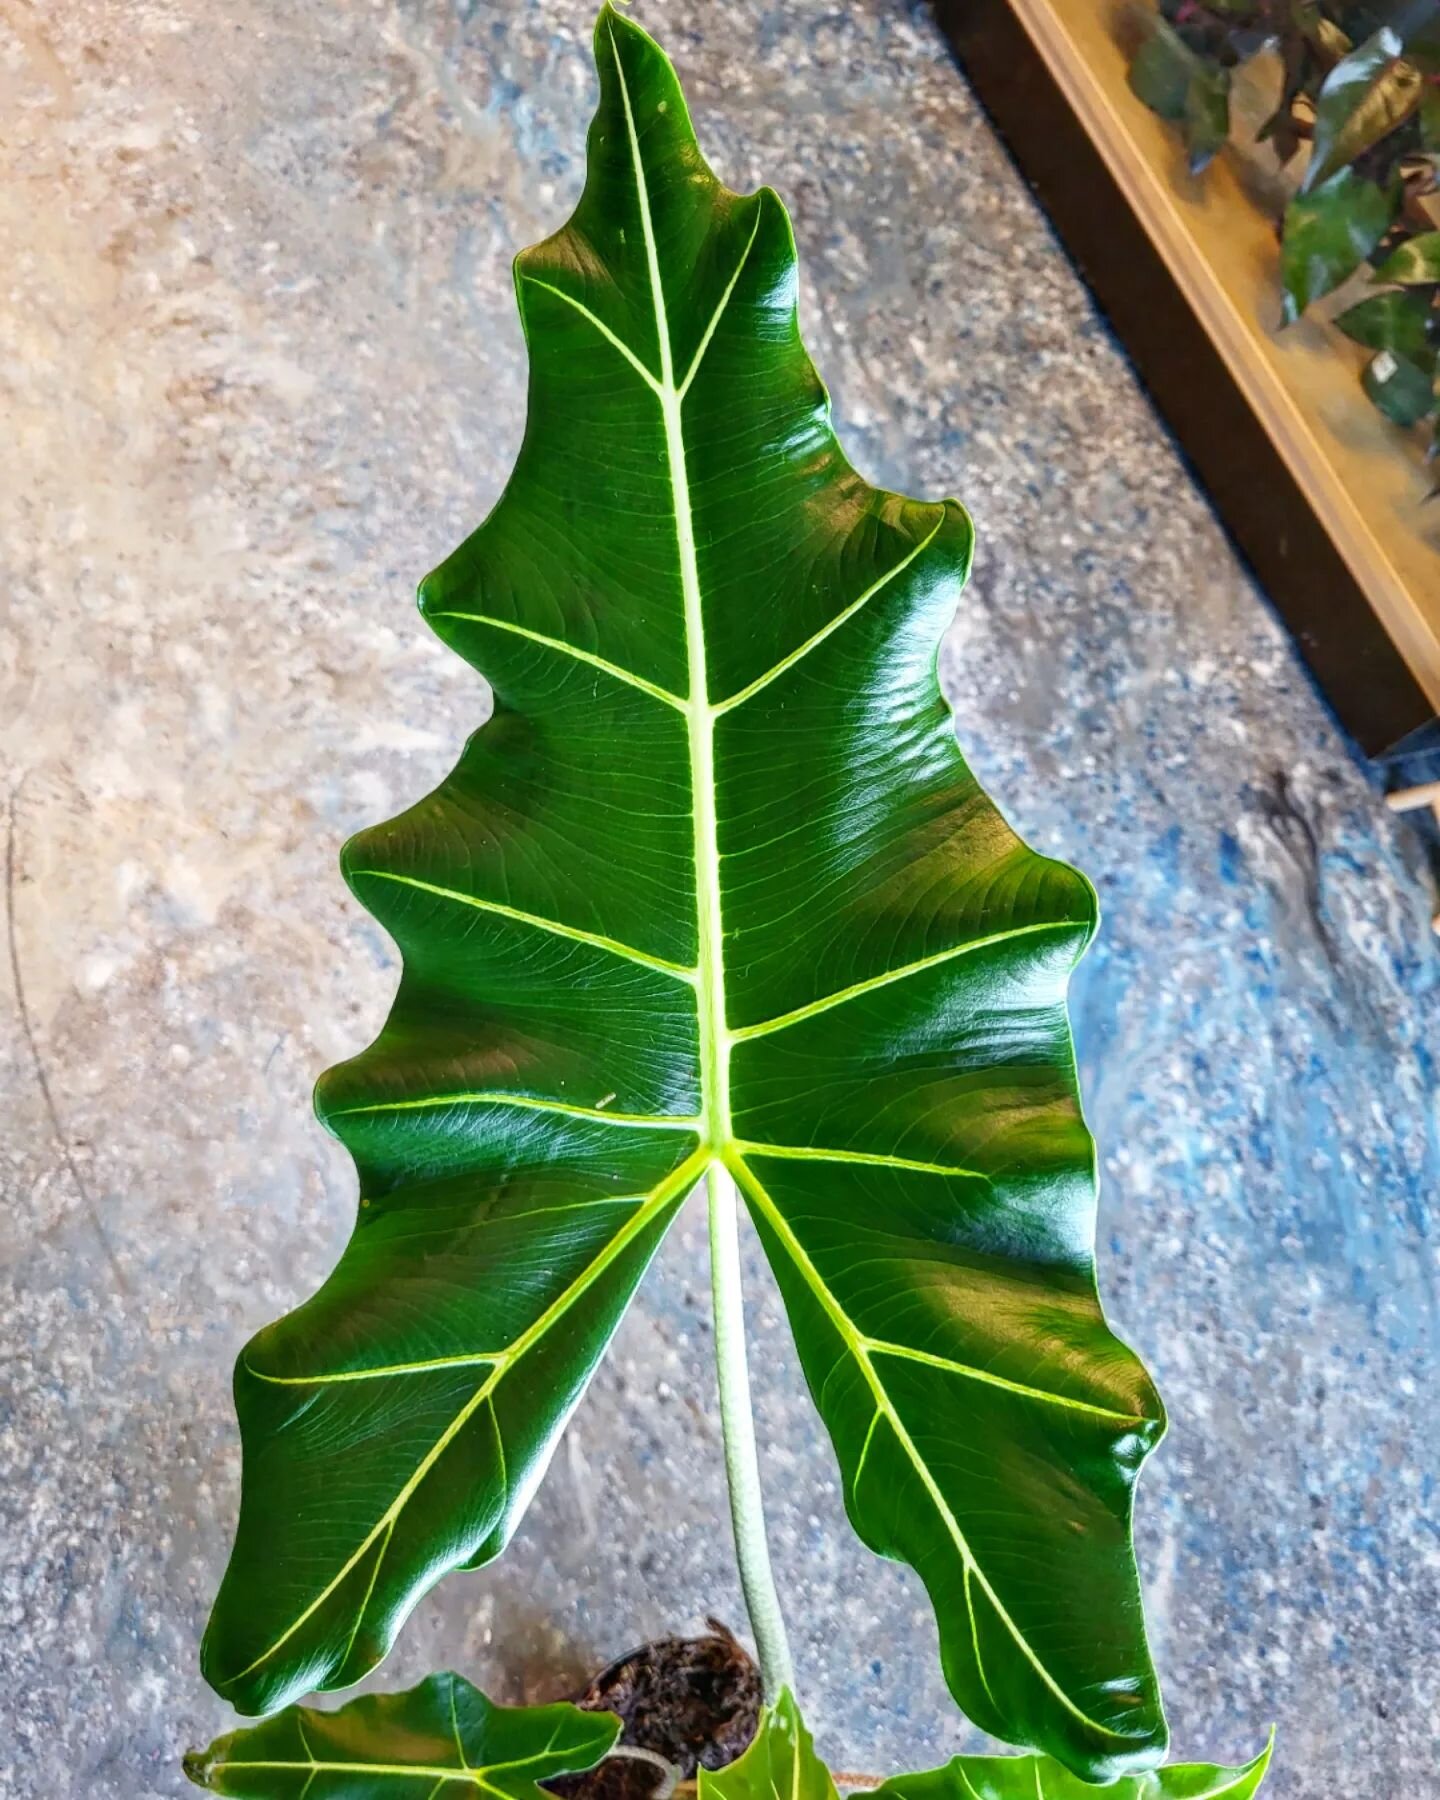 ✨️ALOCASIA SARIAN✨️

📍originates from the rainforests of South Asia
🌡 prefers to stay warm (low 70s)/ humid climates
💦 constantly moist (not soggy) soil needed
🌞 bright but indirect light
🌿 fertilize every 2 weeks in Spring/Summer (growing seaso